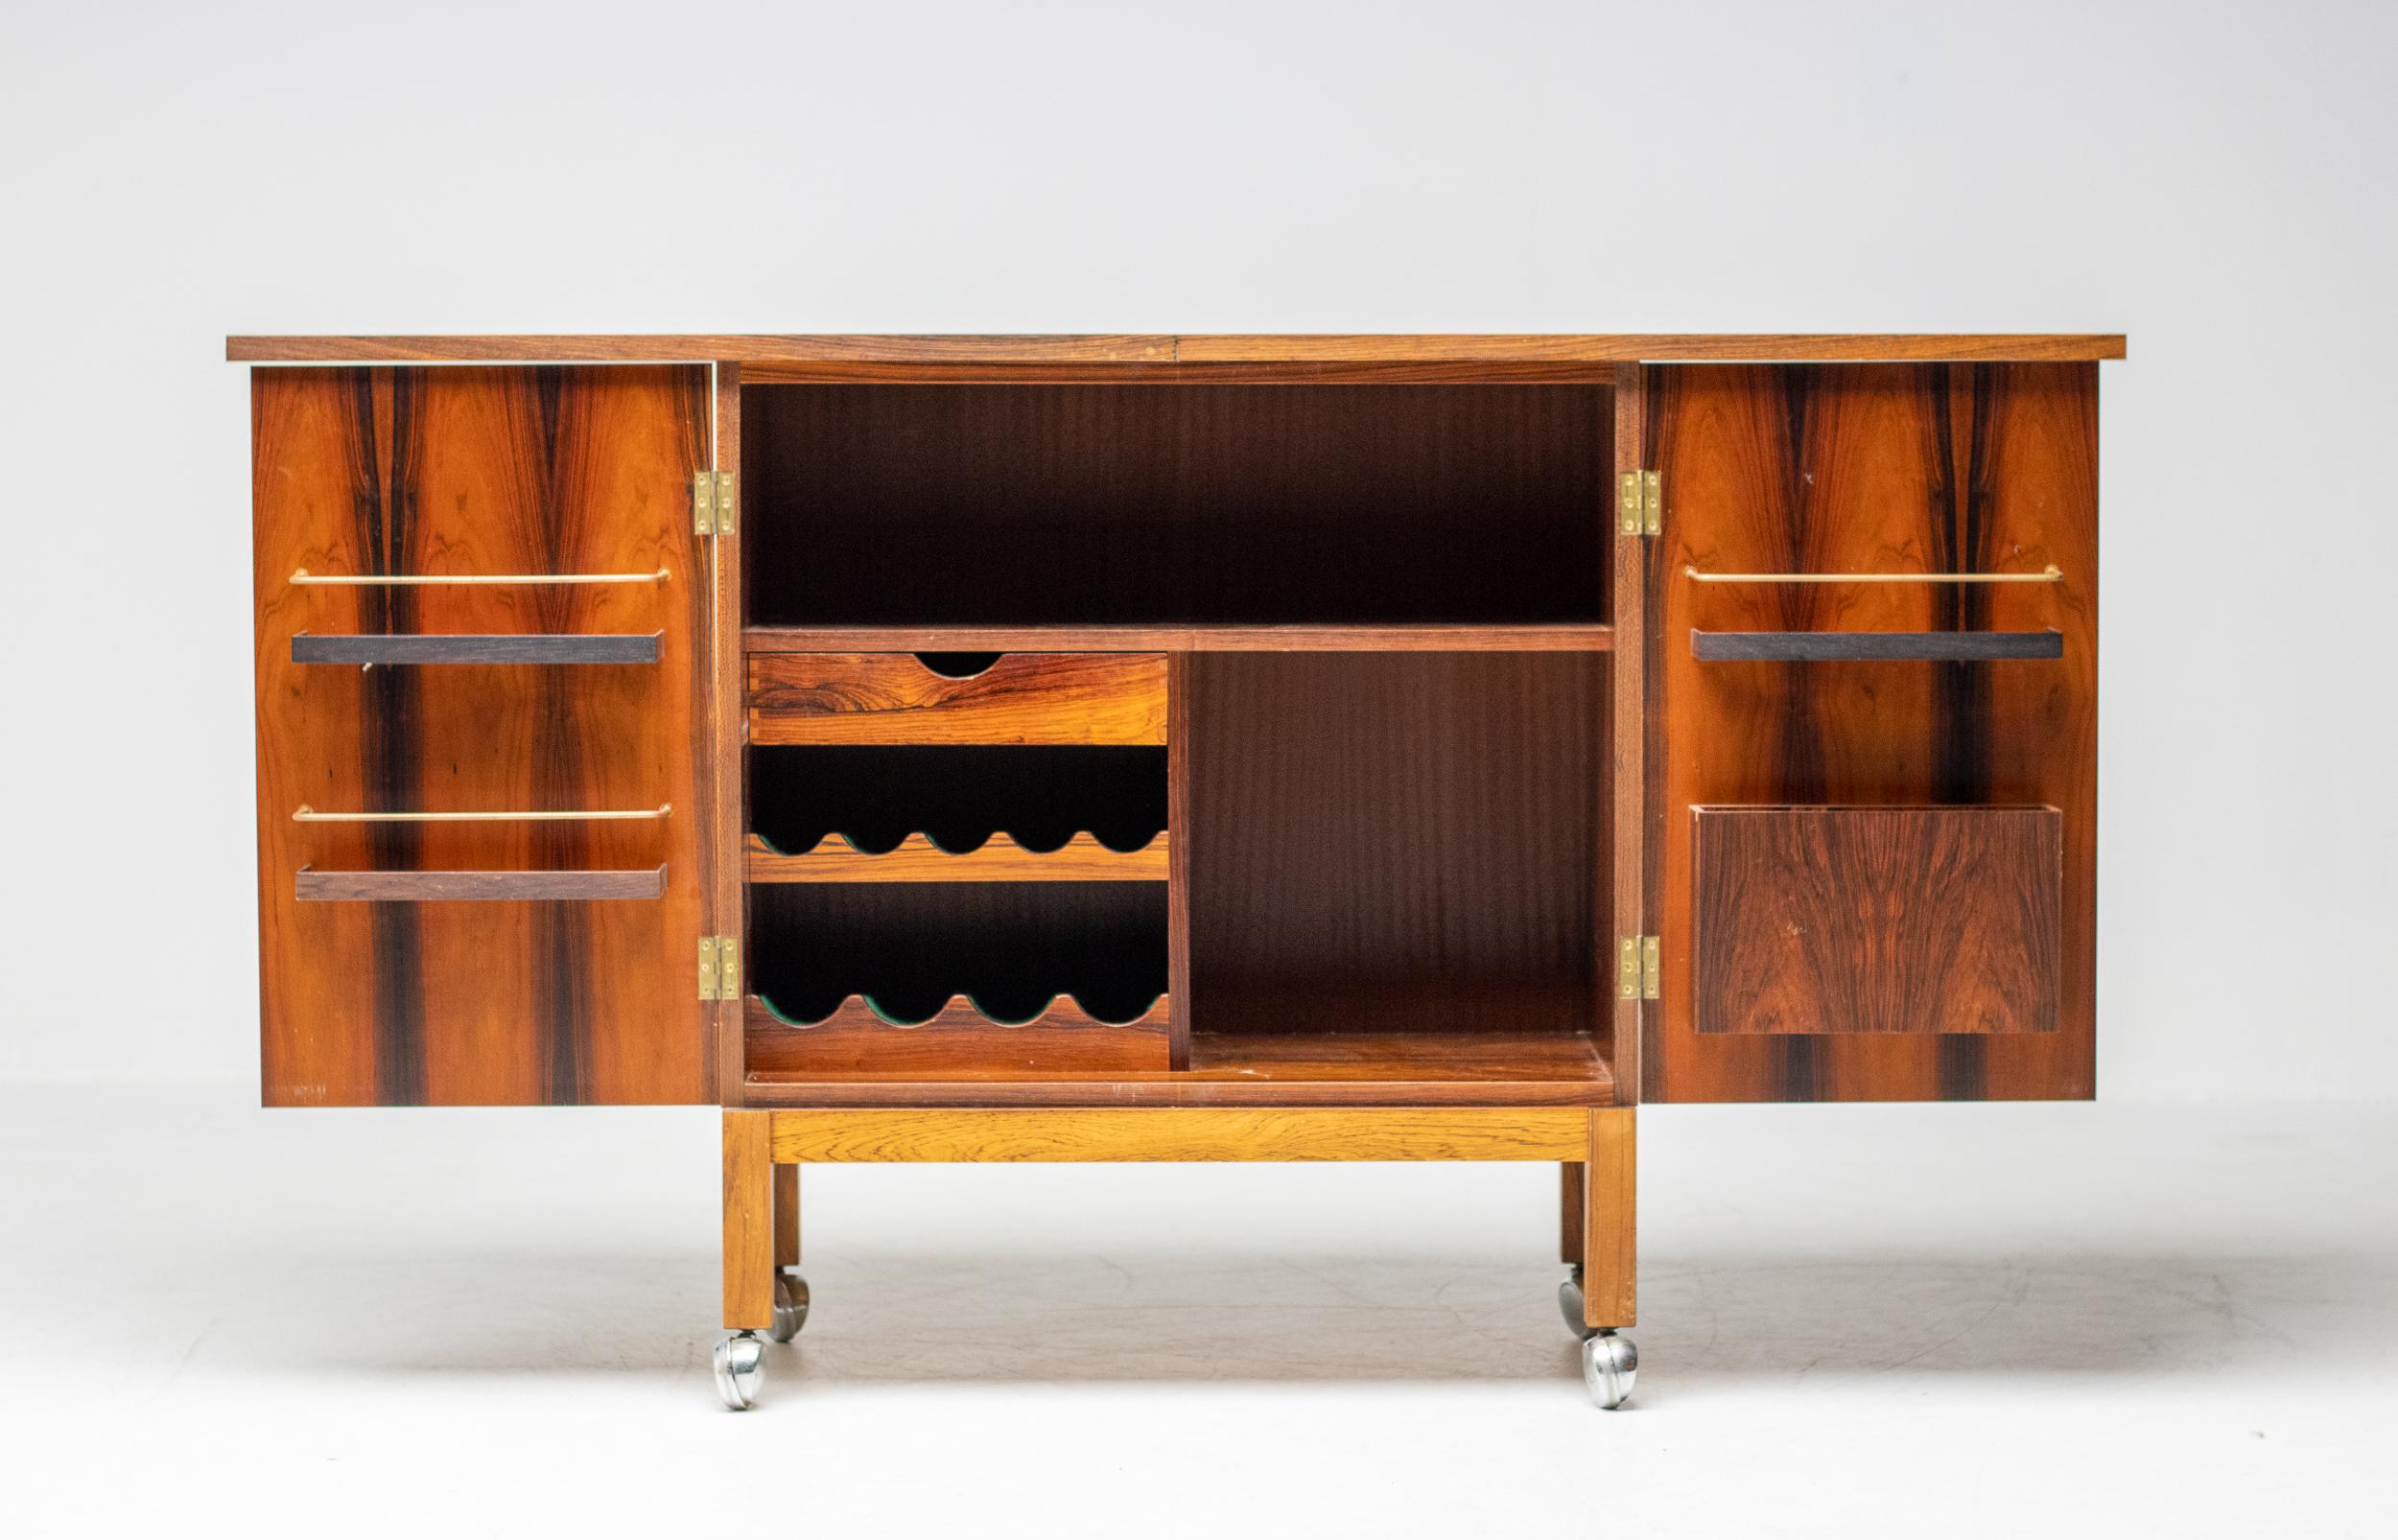 Rare and practical bar cabinet model Times designed by Torbjørn Afdal and produced by Mellemstrands Møbelfabrik in Norway. Exceptional piece in beautiful all original condition.

Torbjørn Afdal was a Norwegian furniture designer who was born in 1917